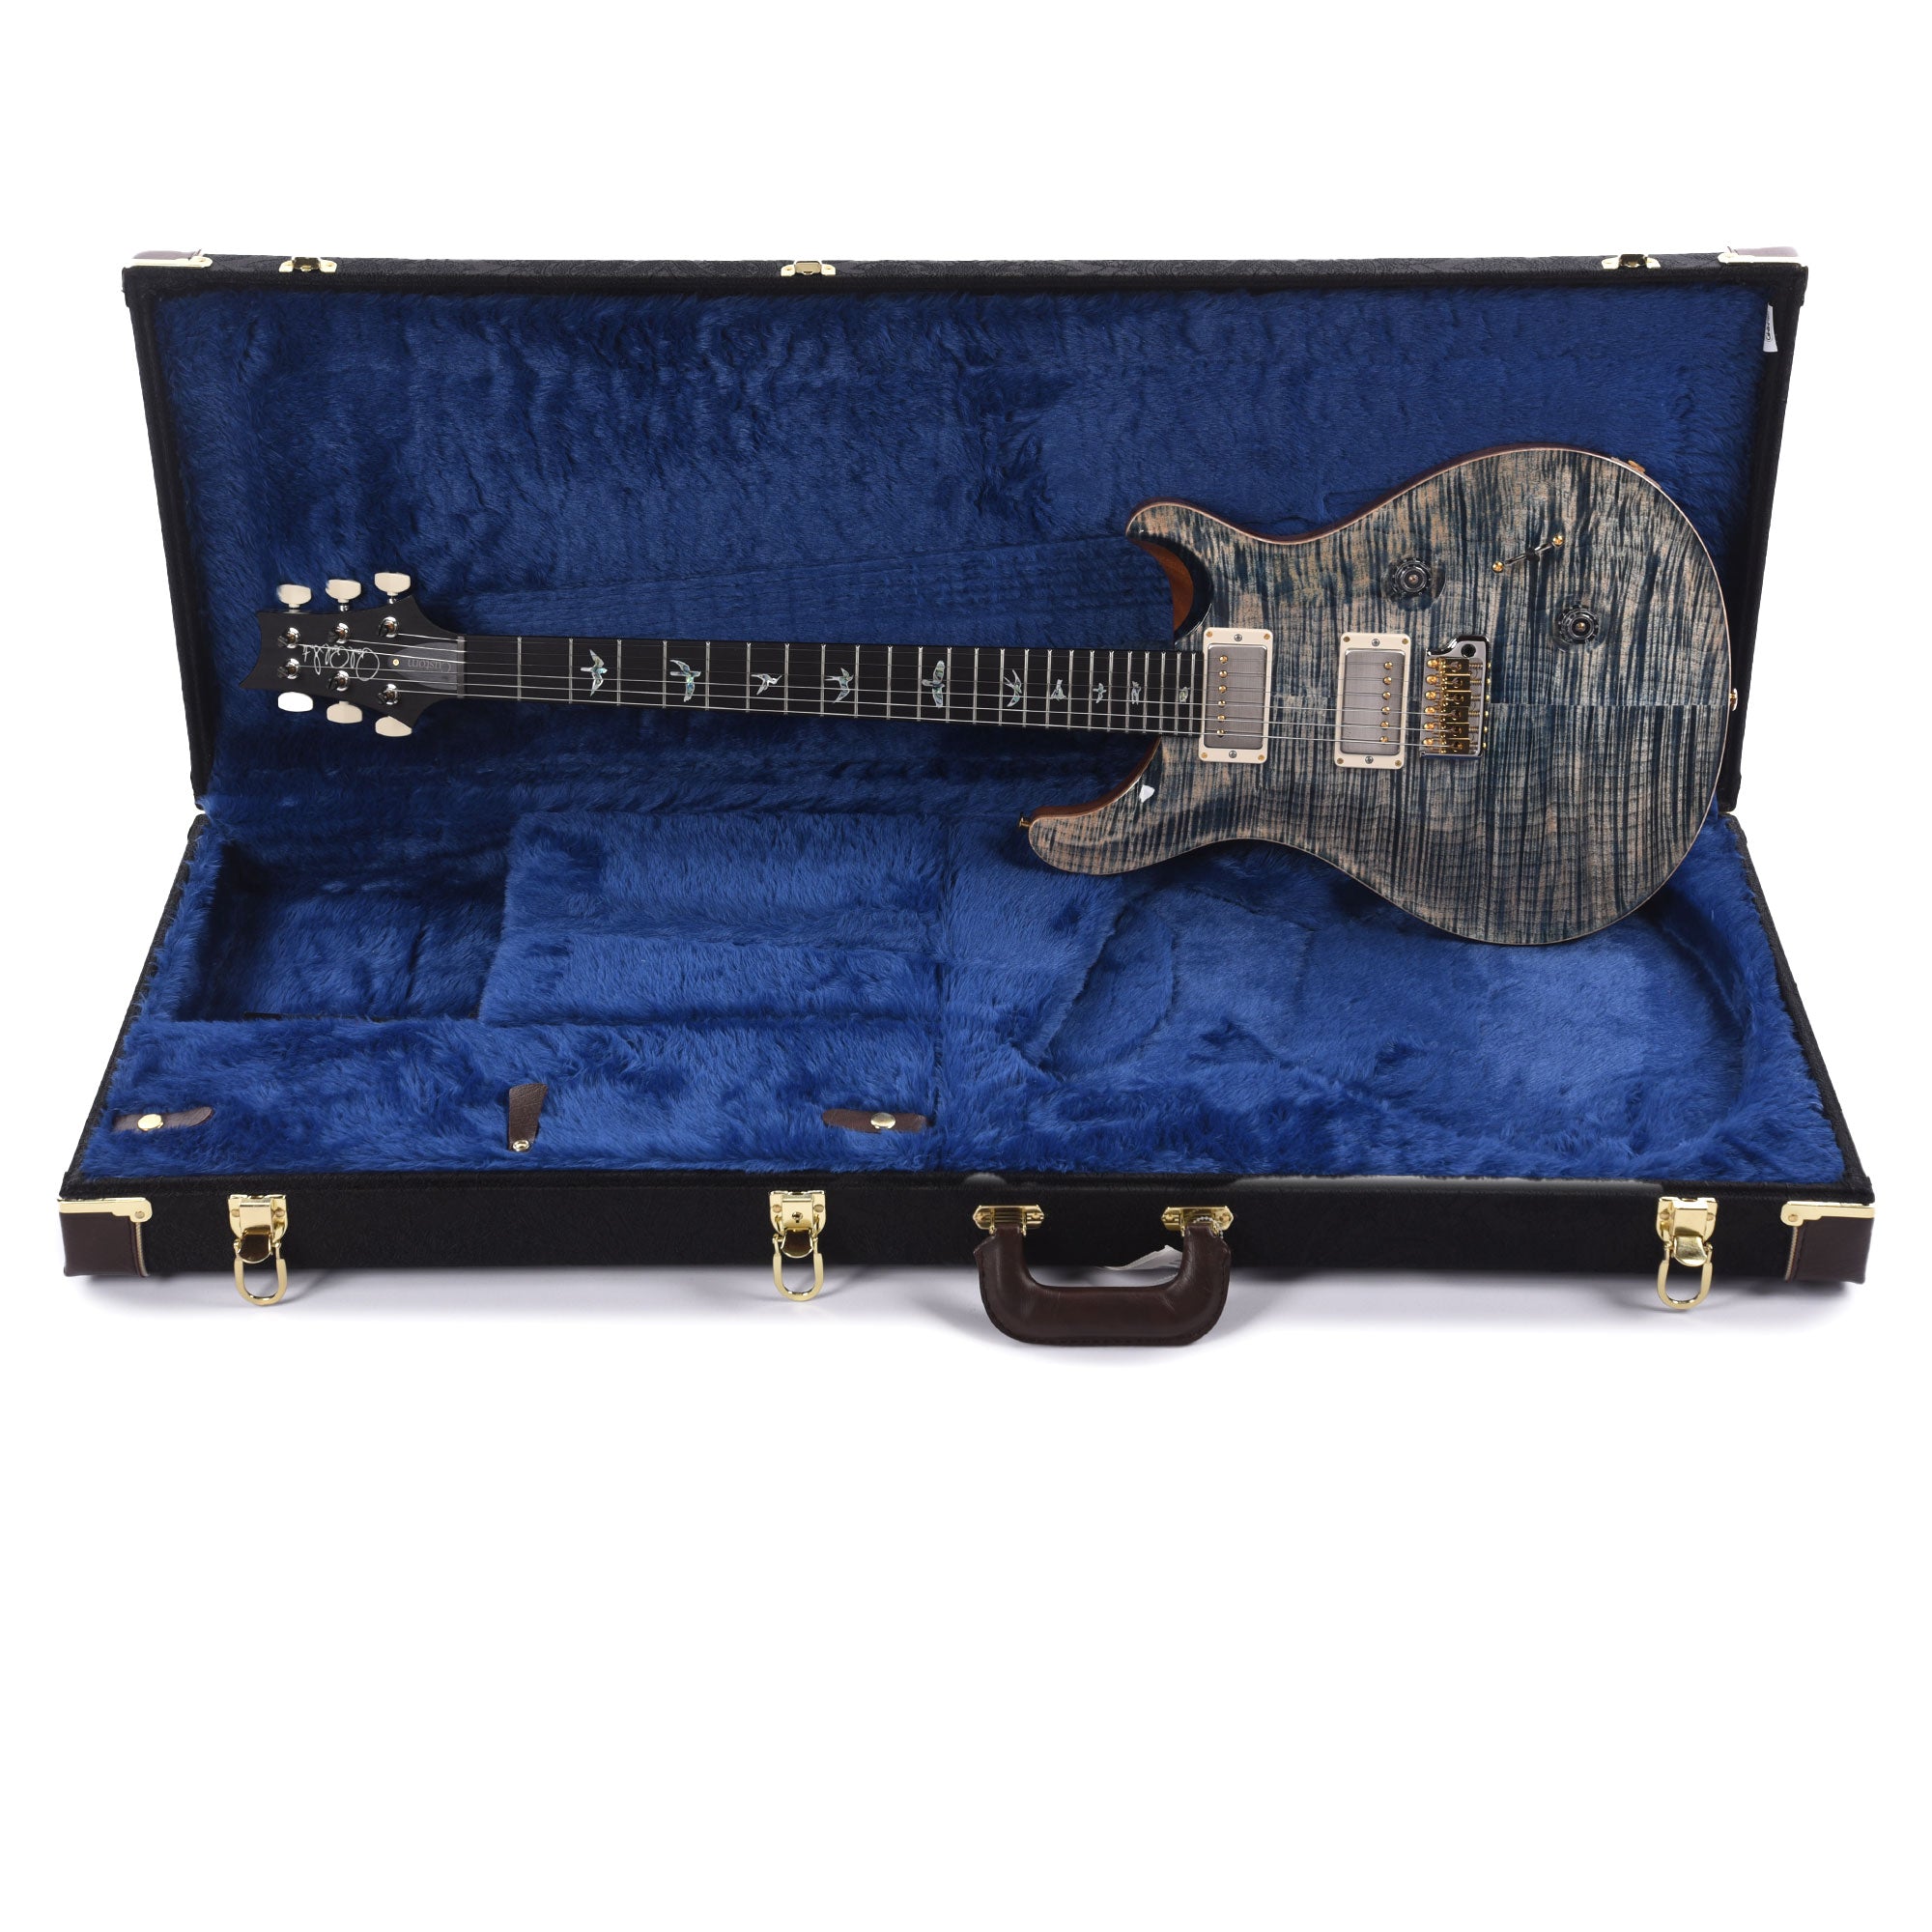 PRS Wood Library Custom 24 Fat Back 10-Top Flame Faded Whale Blue w/Figured Stained Neck & African Blackwood Fingerboard